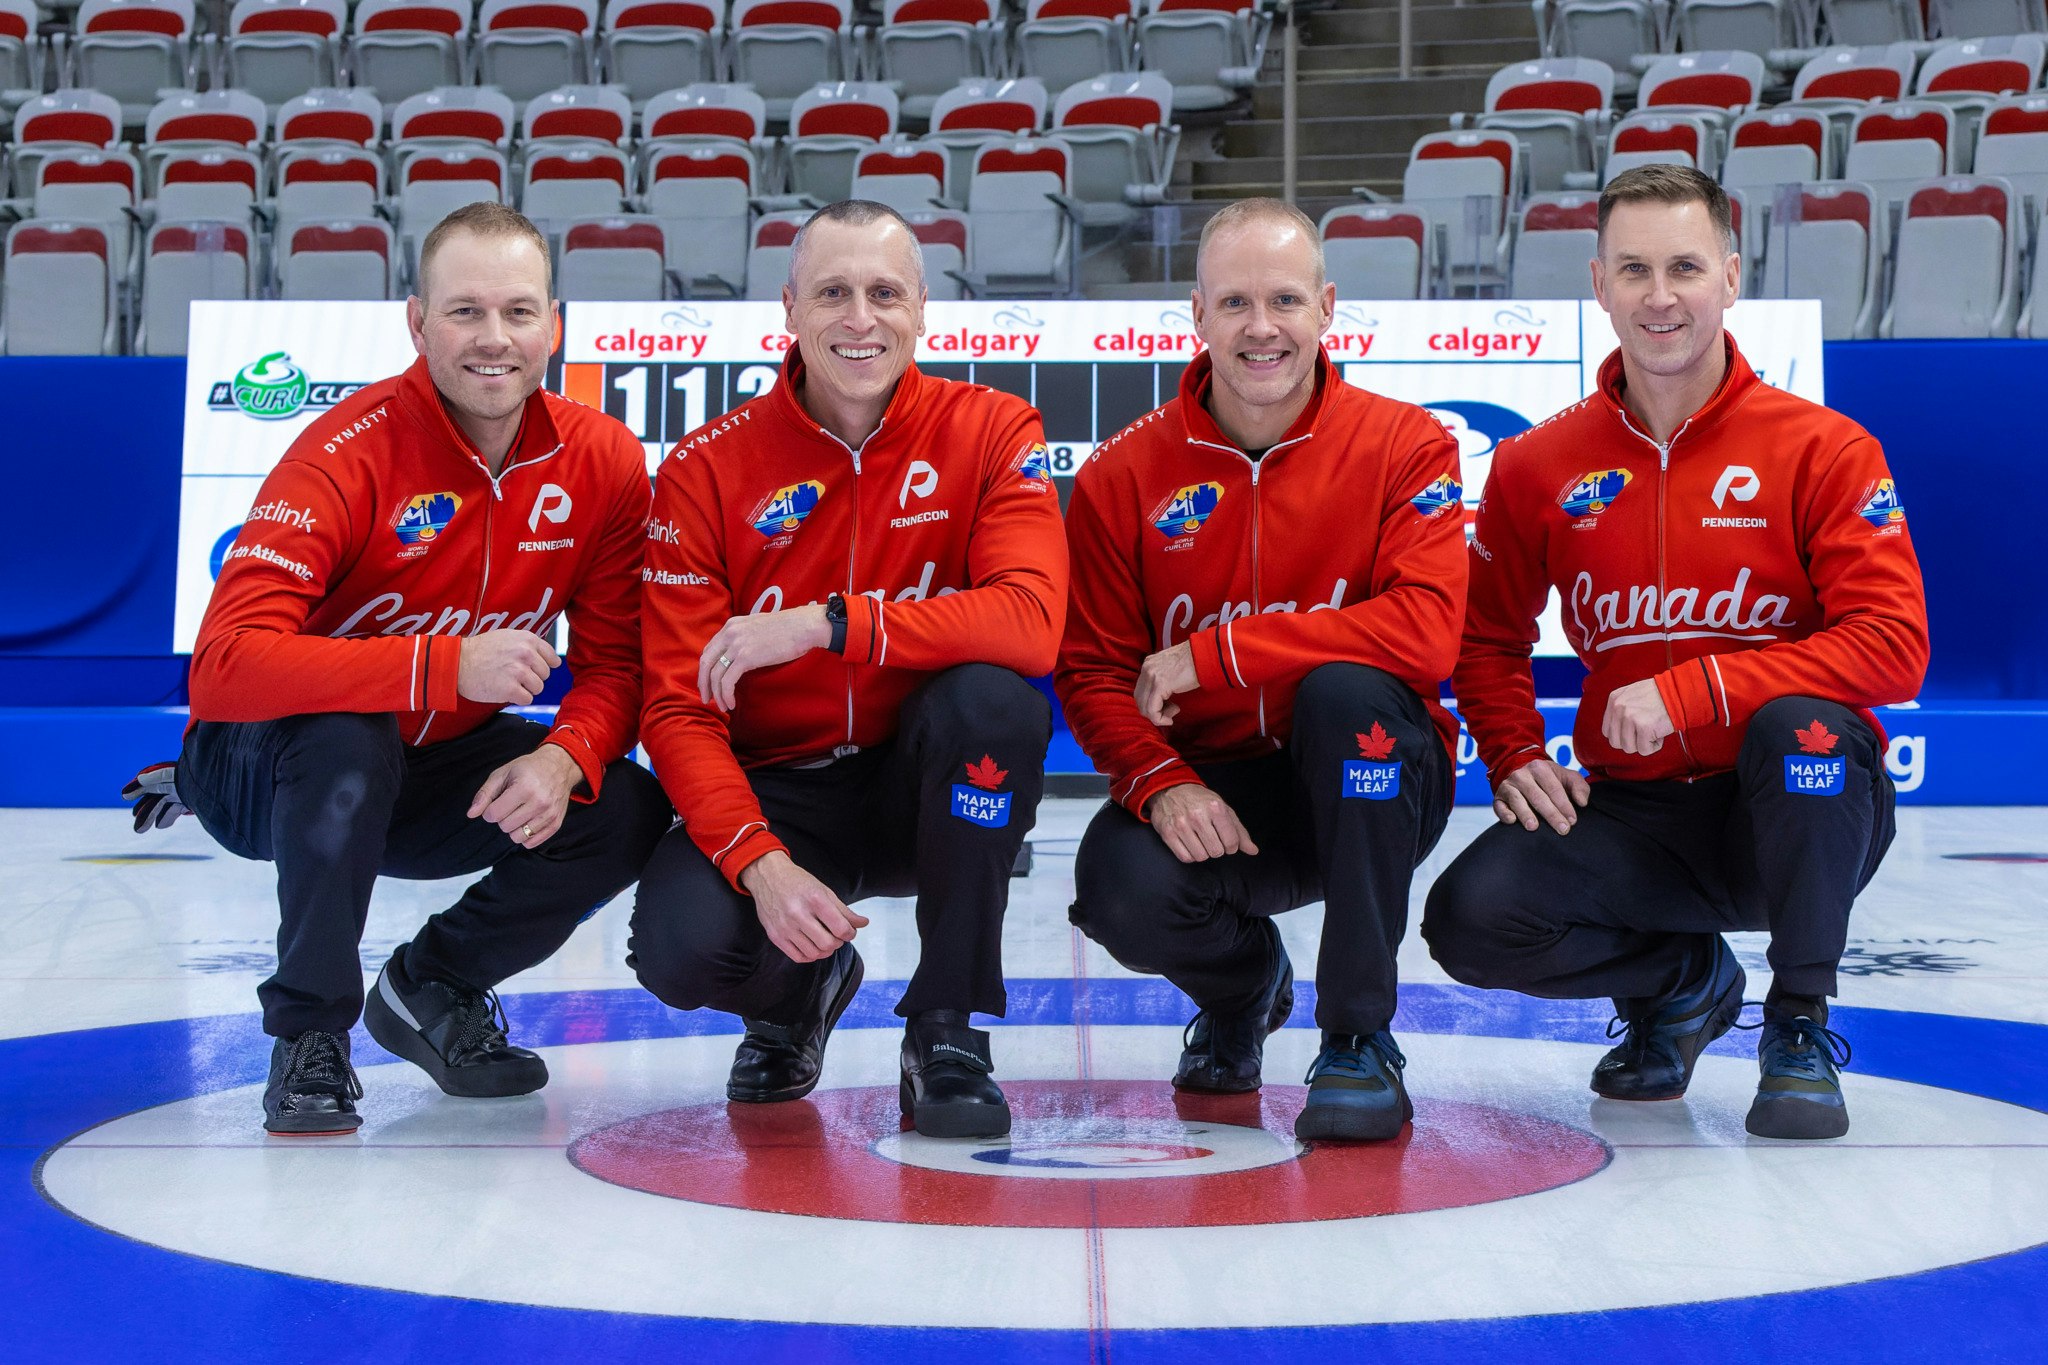 TSNs Season of Champions Continues with Comprehensive Live Coverage of the 2023 TIM HORTONS BRIER, Beginning March 3